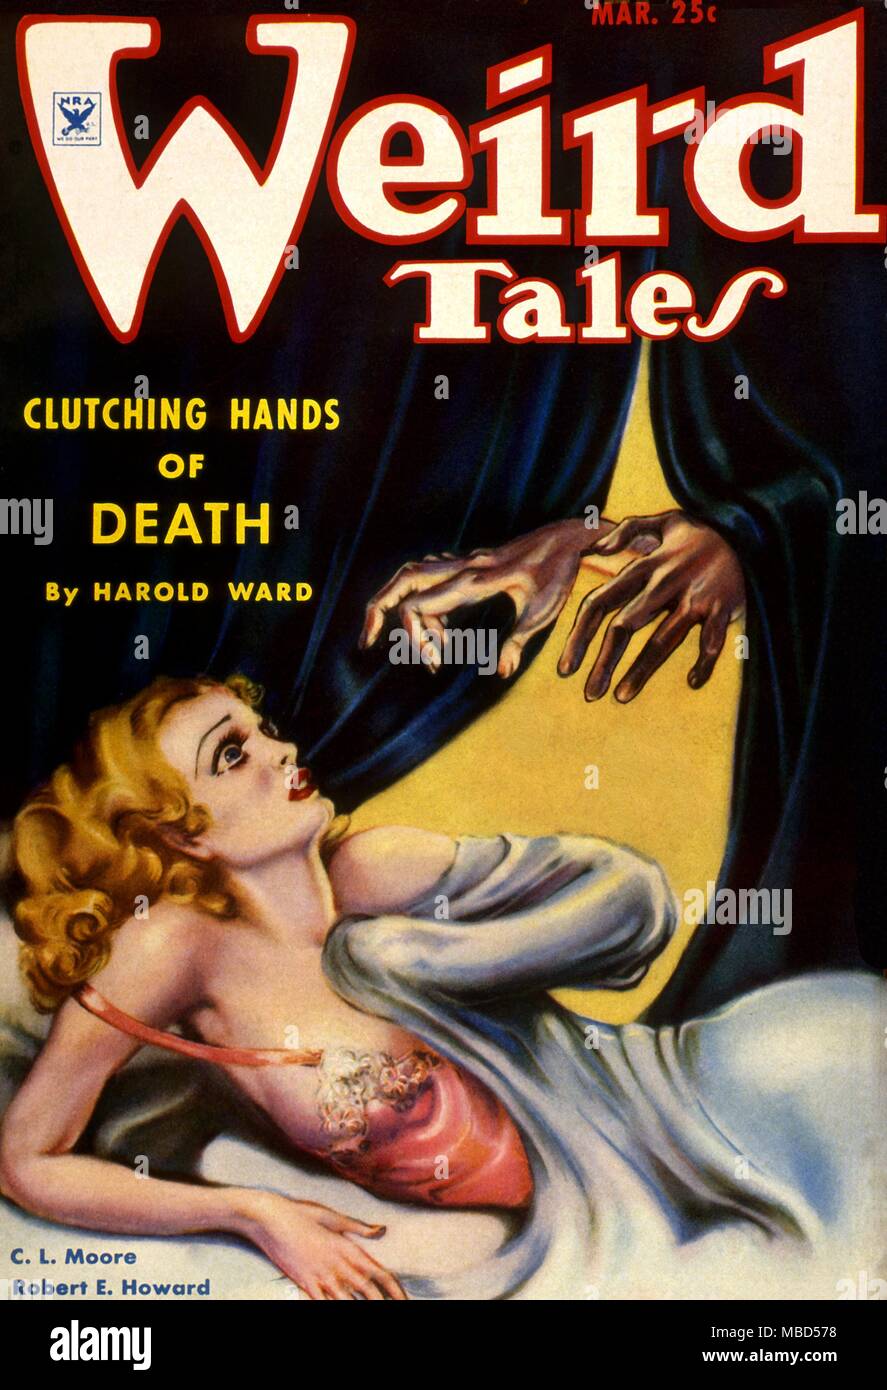 Science Fiction and Horror Magazine. Cover of Weird Tales, January 1937. Artwork by Brundage Stock Photo